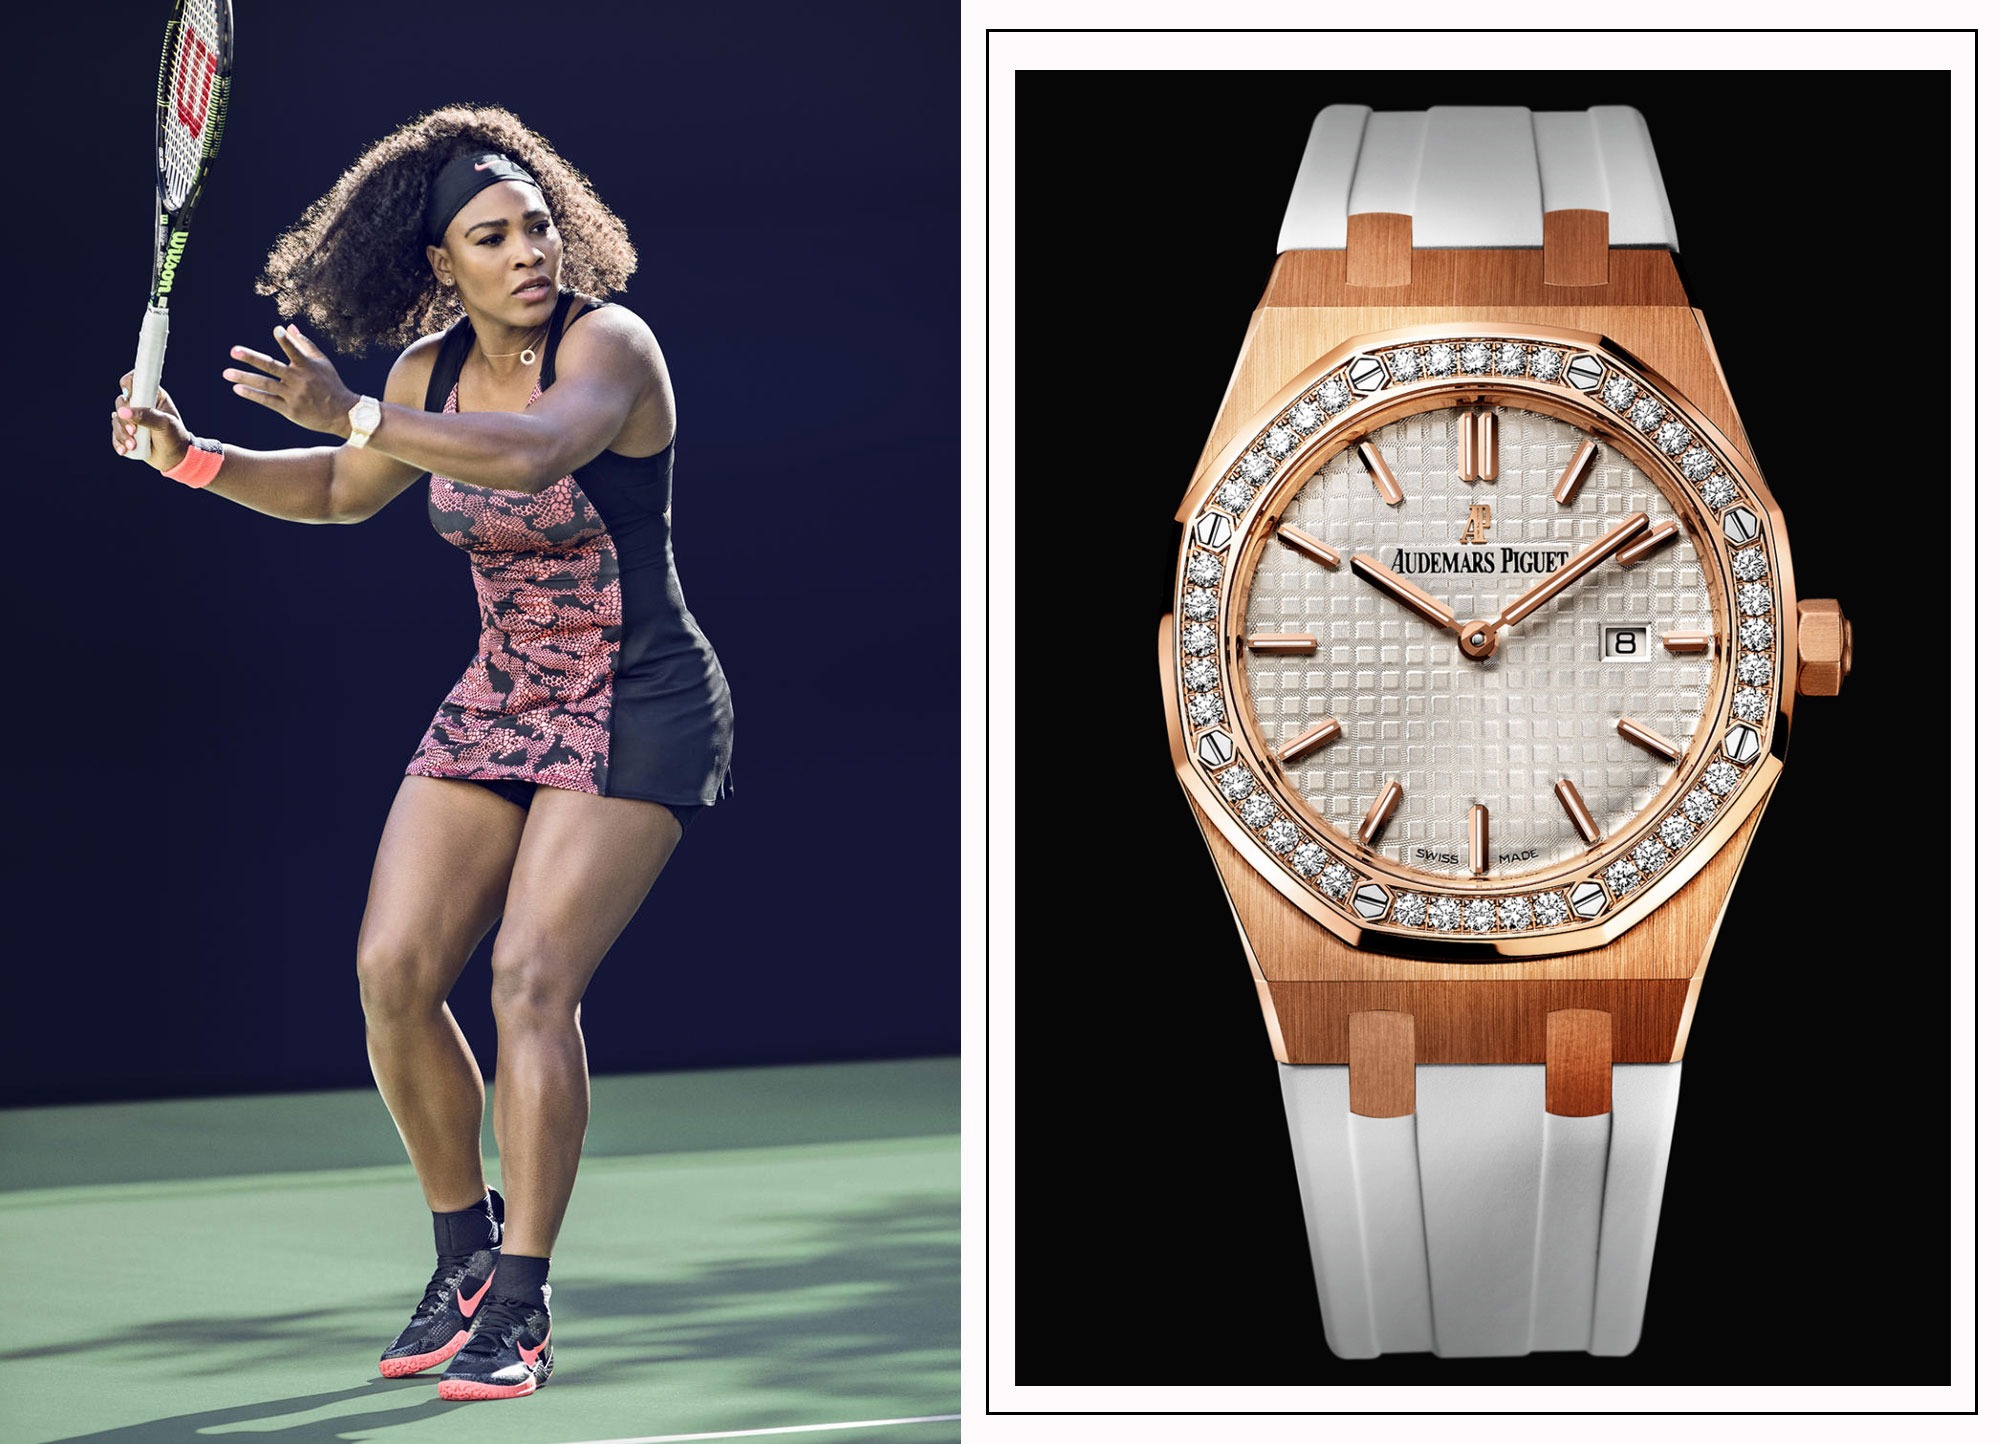 Watches Worn by Top Tennis Players - The Watch Doctor2000 x 1444